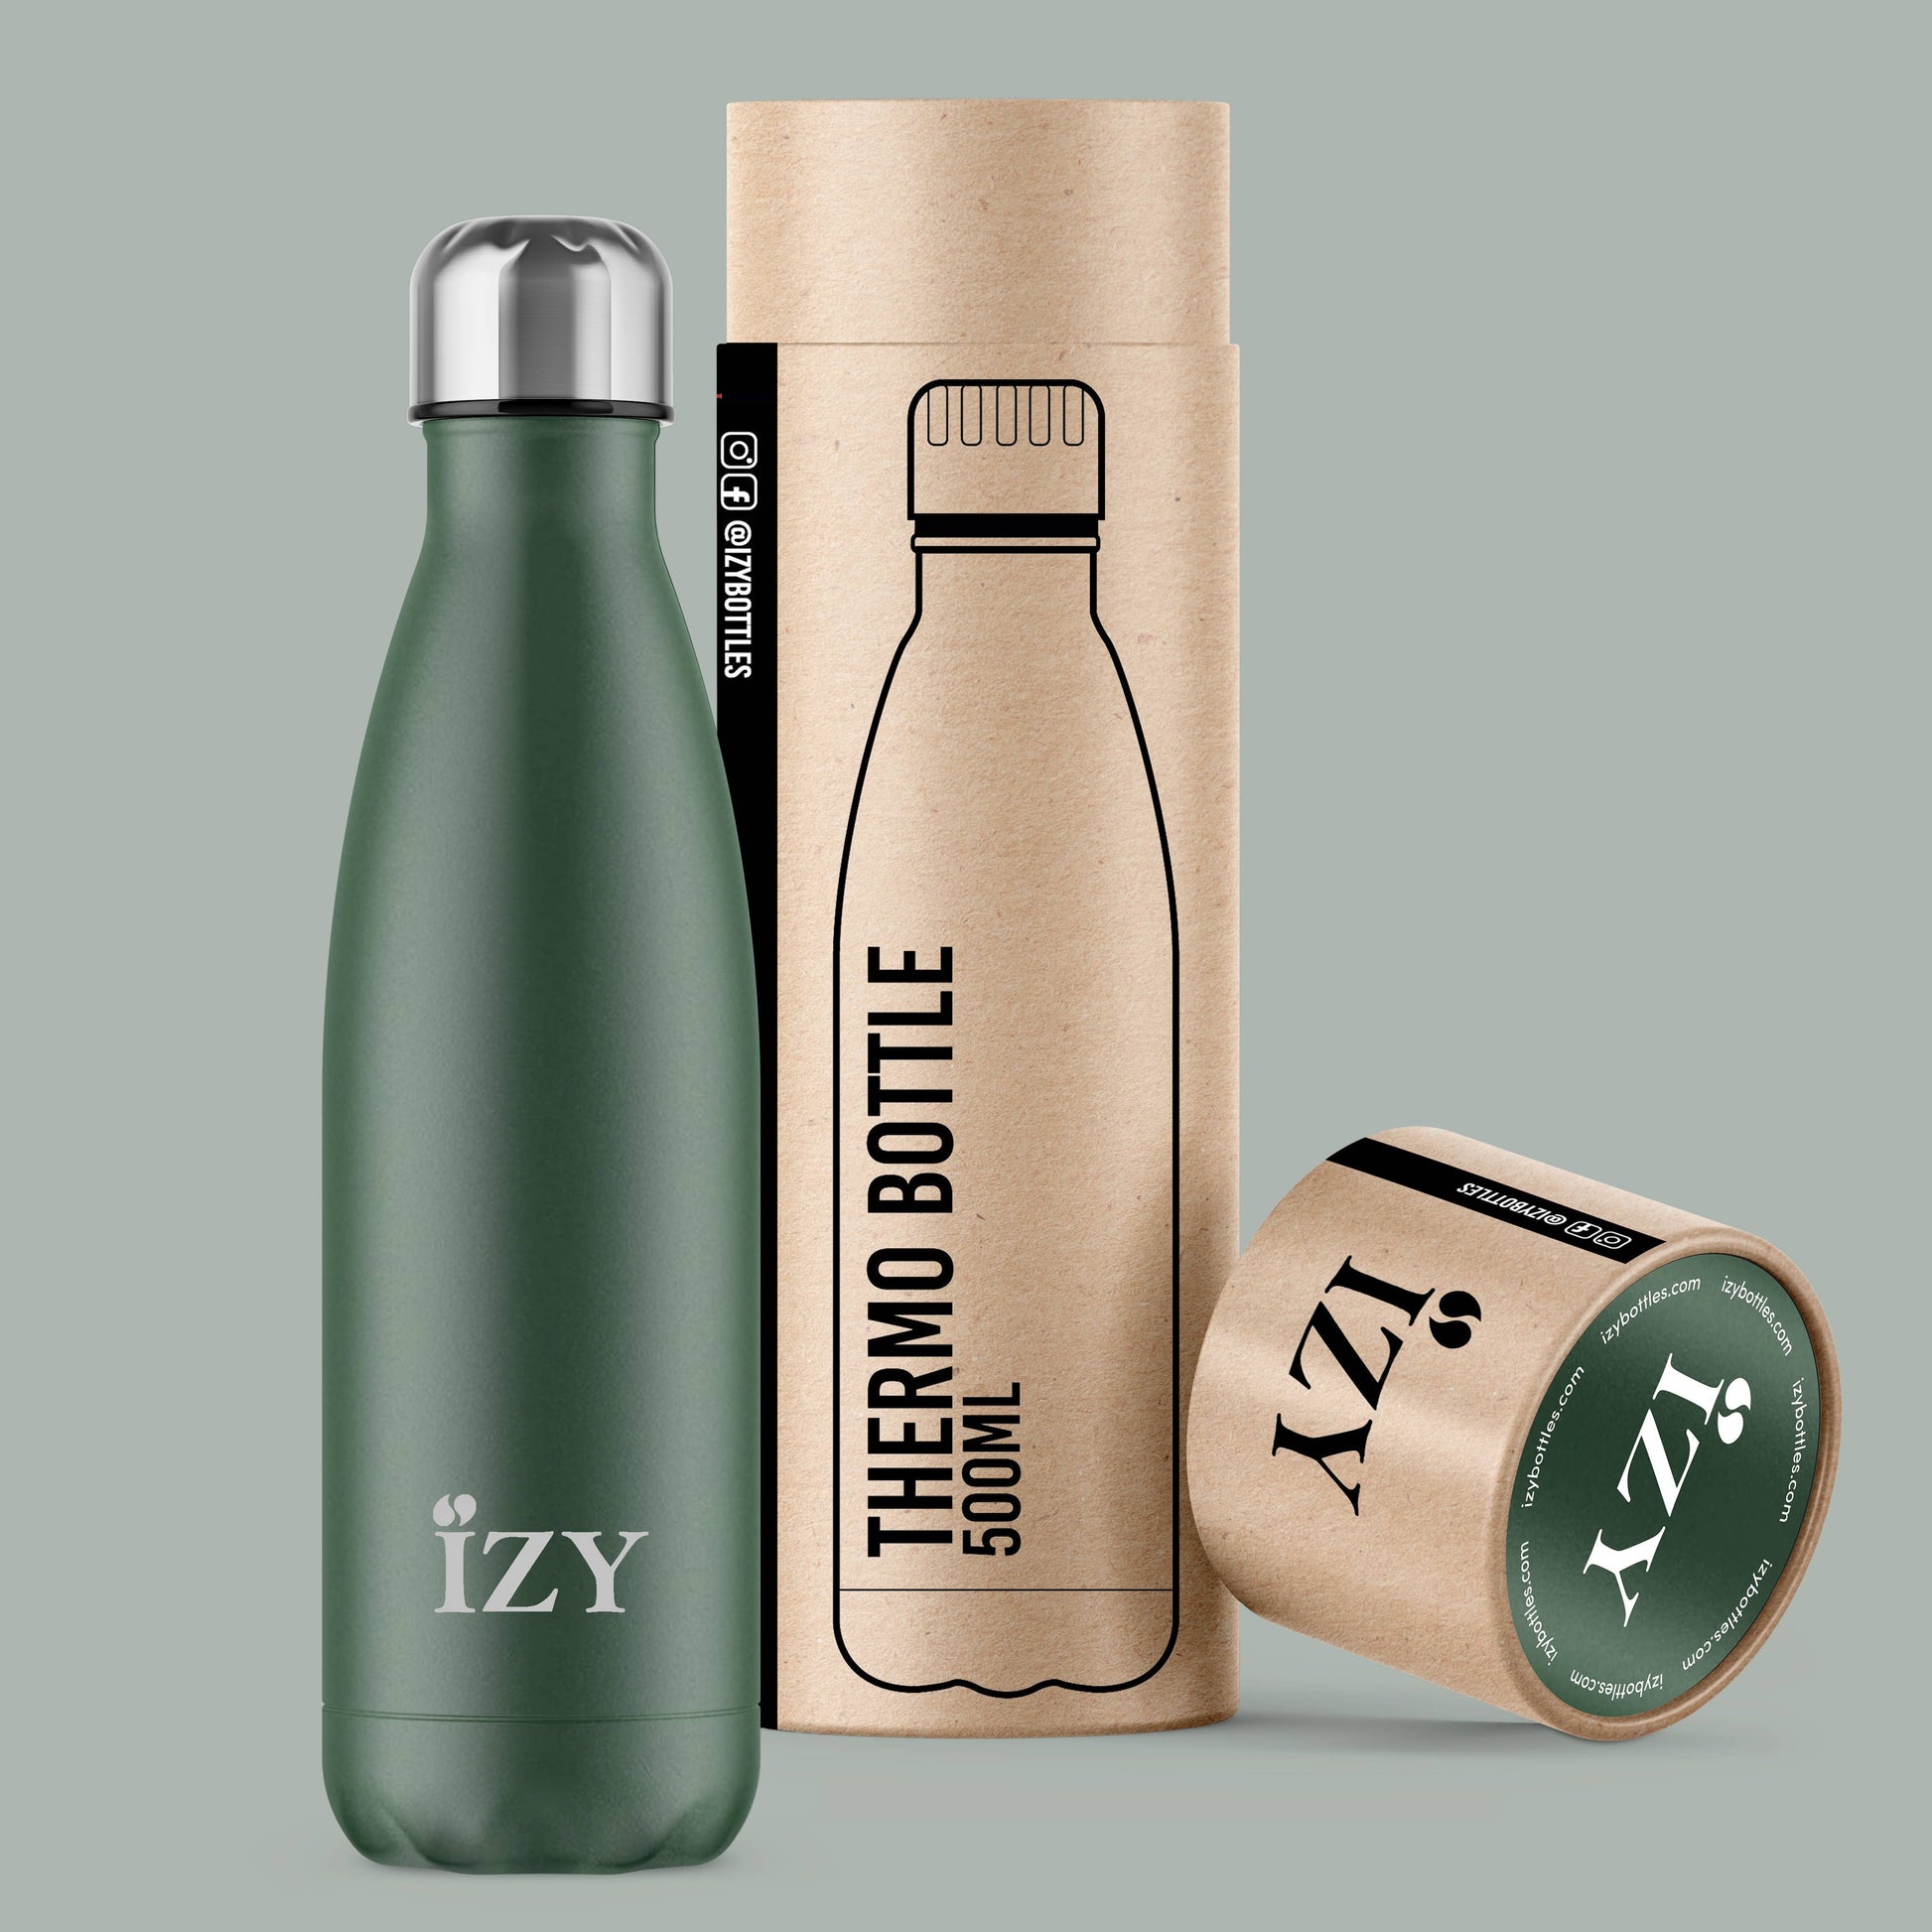 IZY Bottles - Green Insulated Bottle - 17OZ / 500ML - Thermos / Flask - Unik by Nature